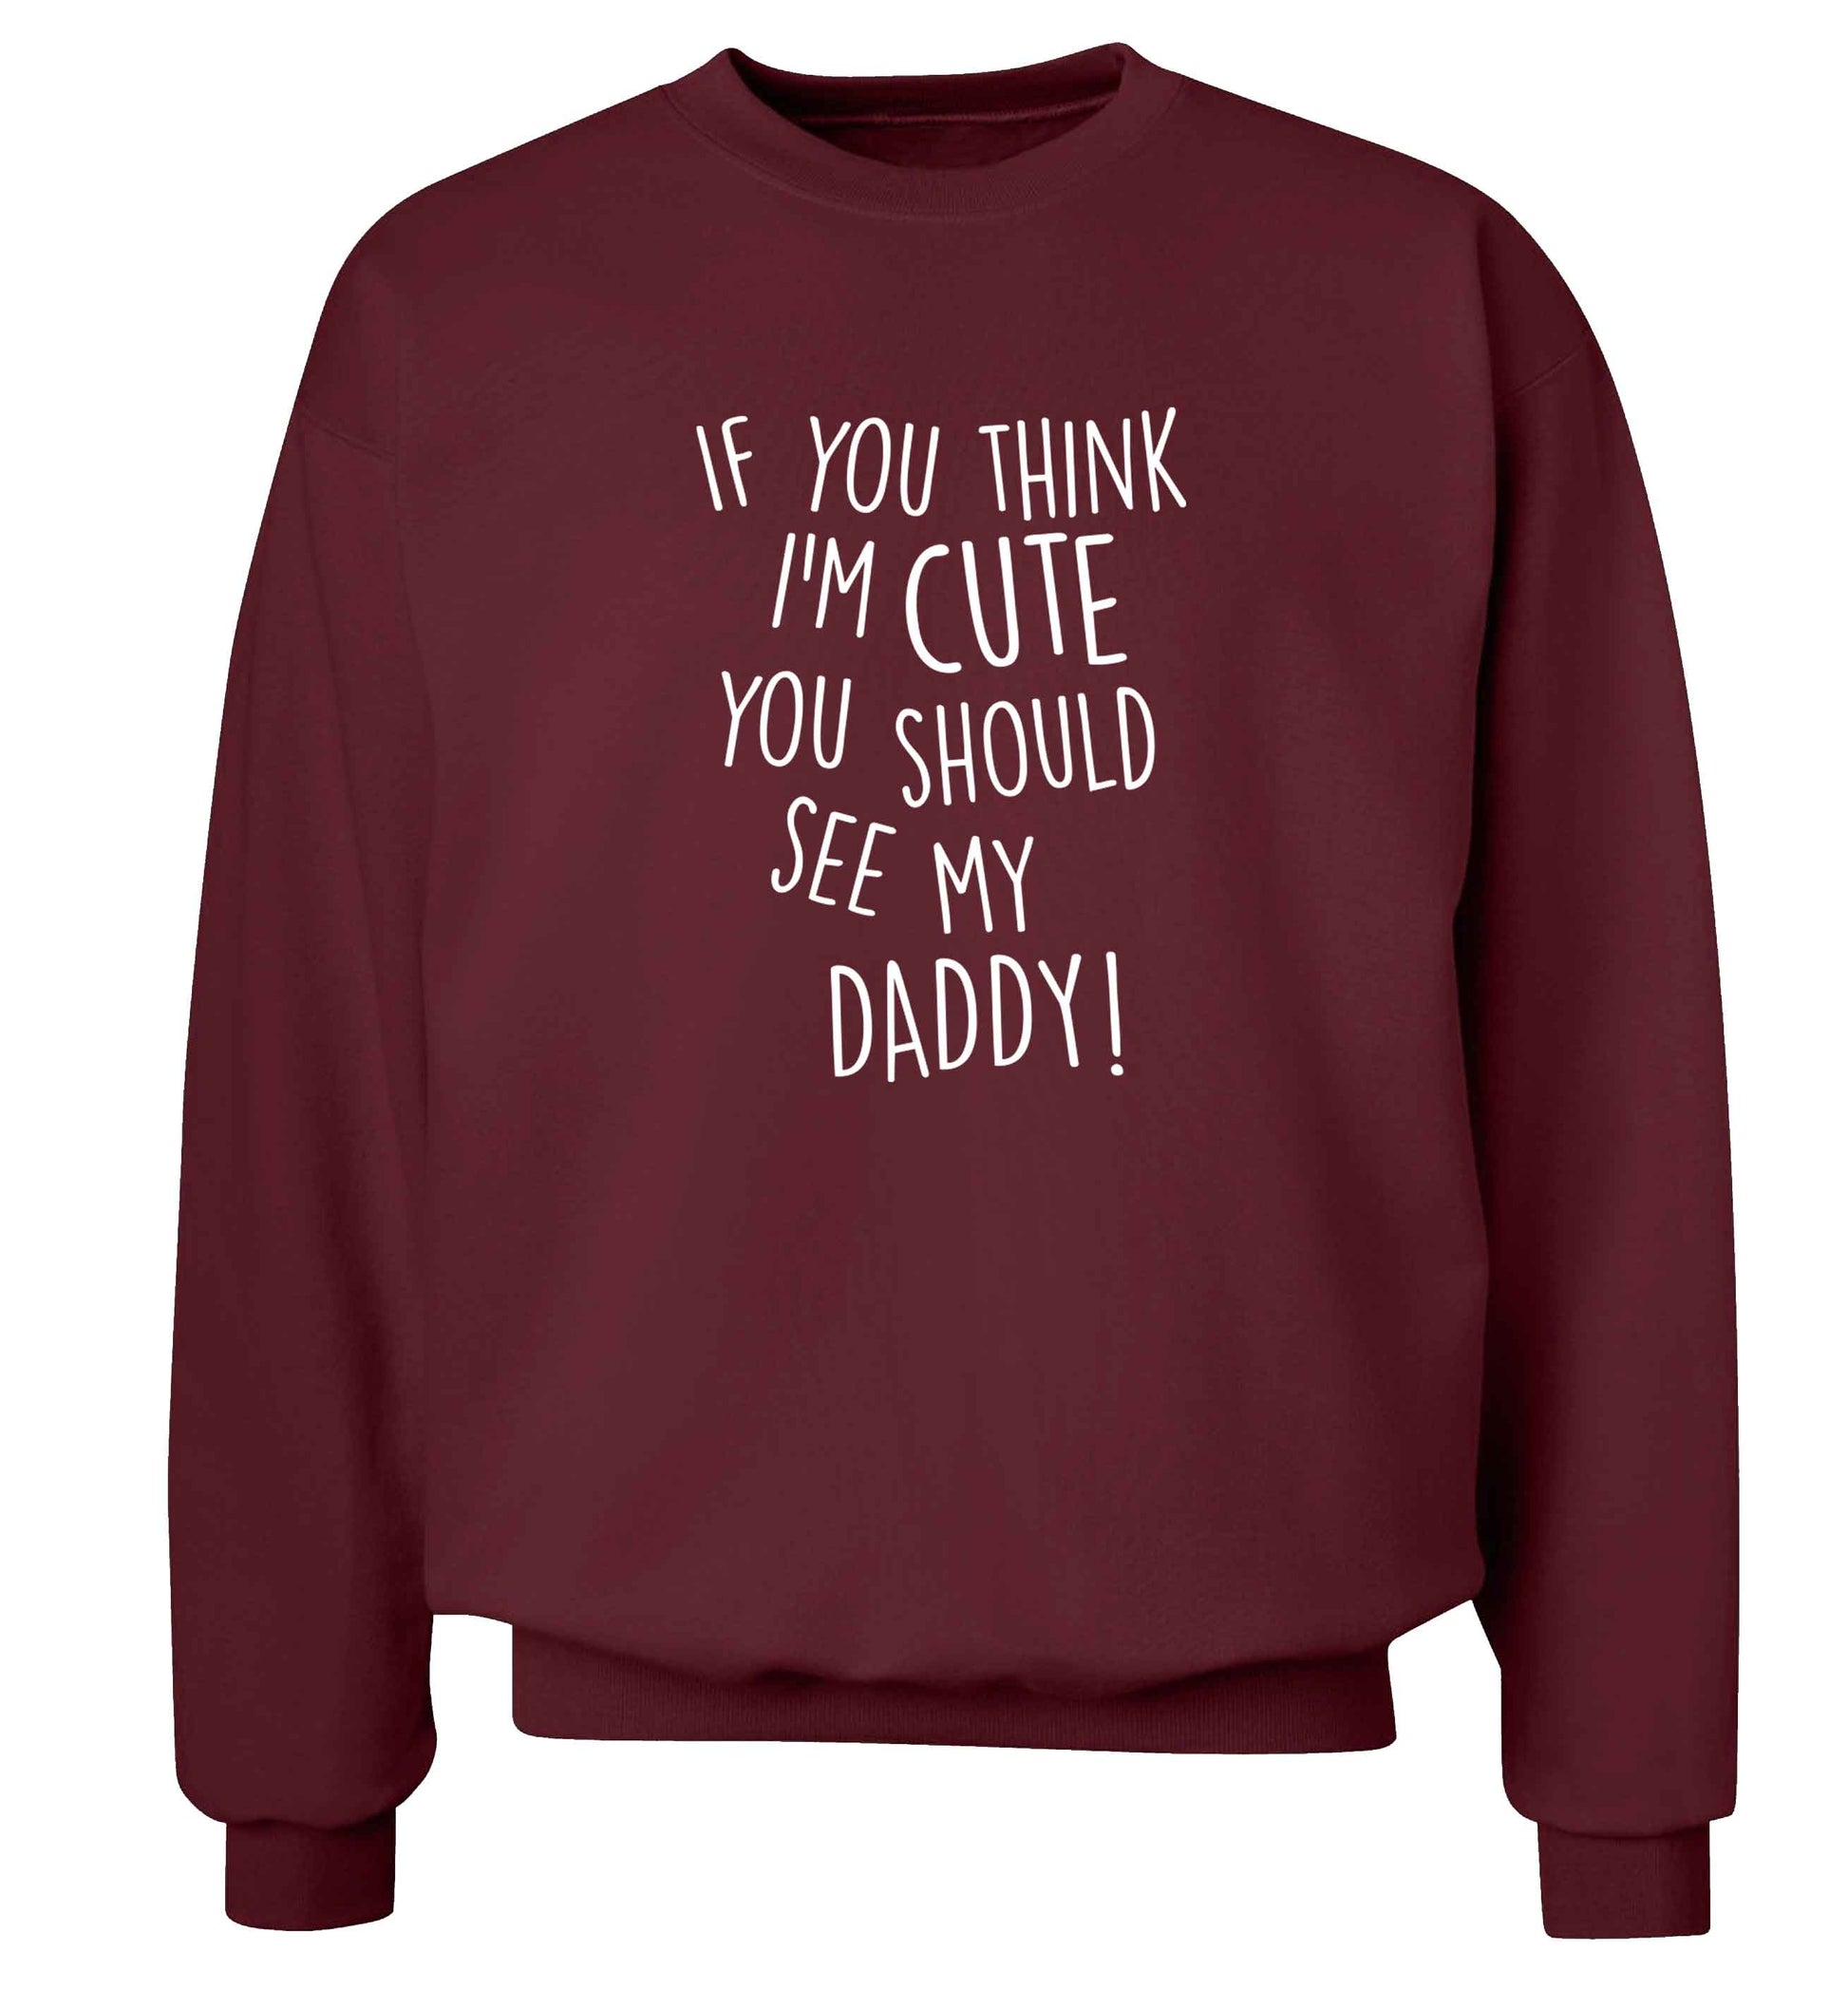 If you think I'm cute you should see my daddy adult's unisex maroon sweater 2XL